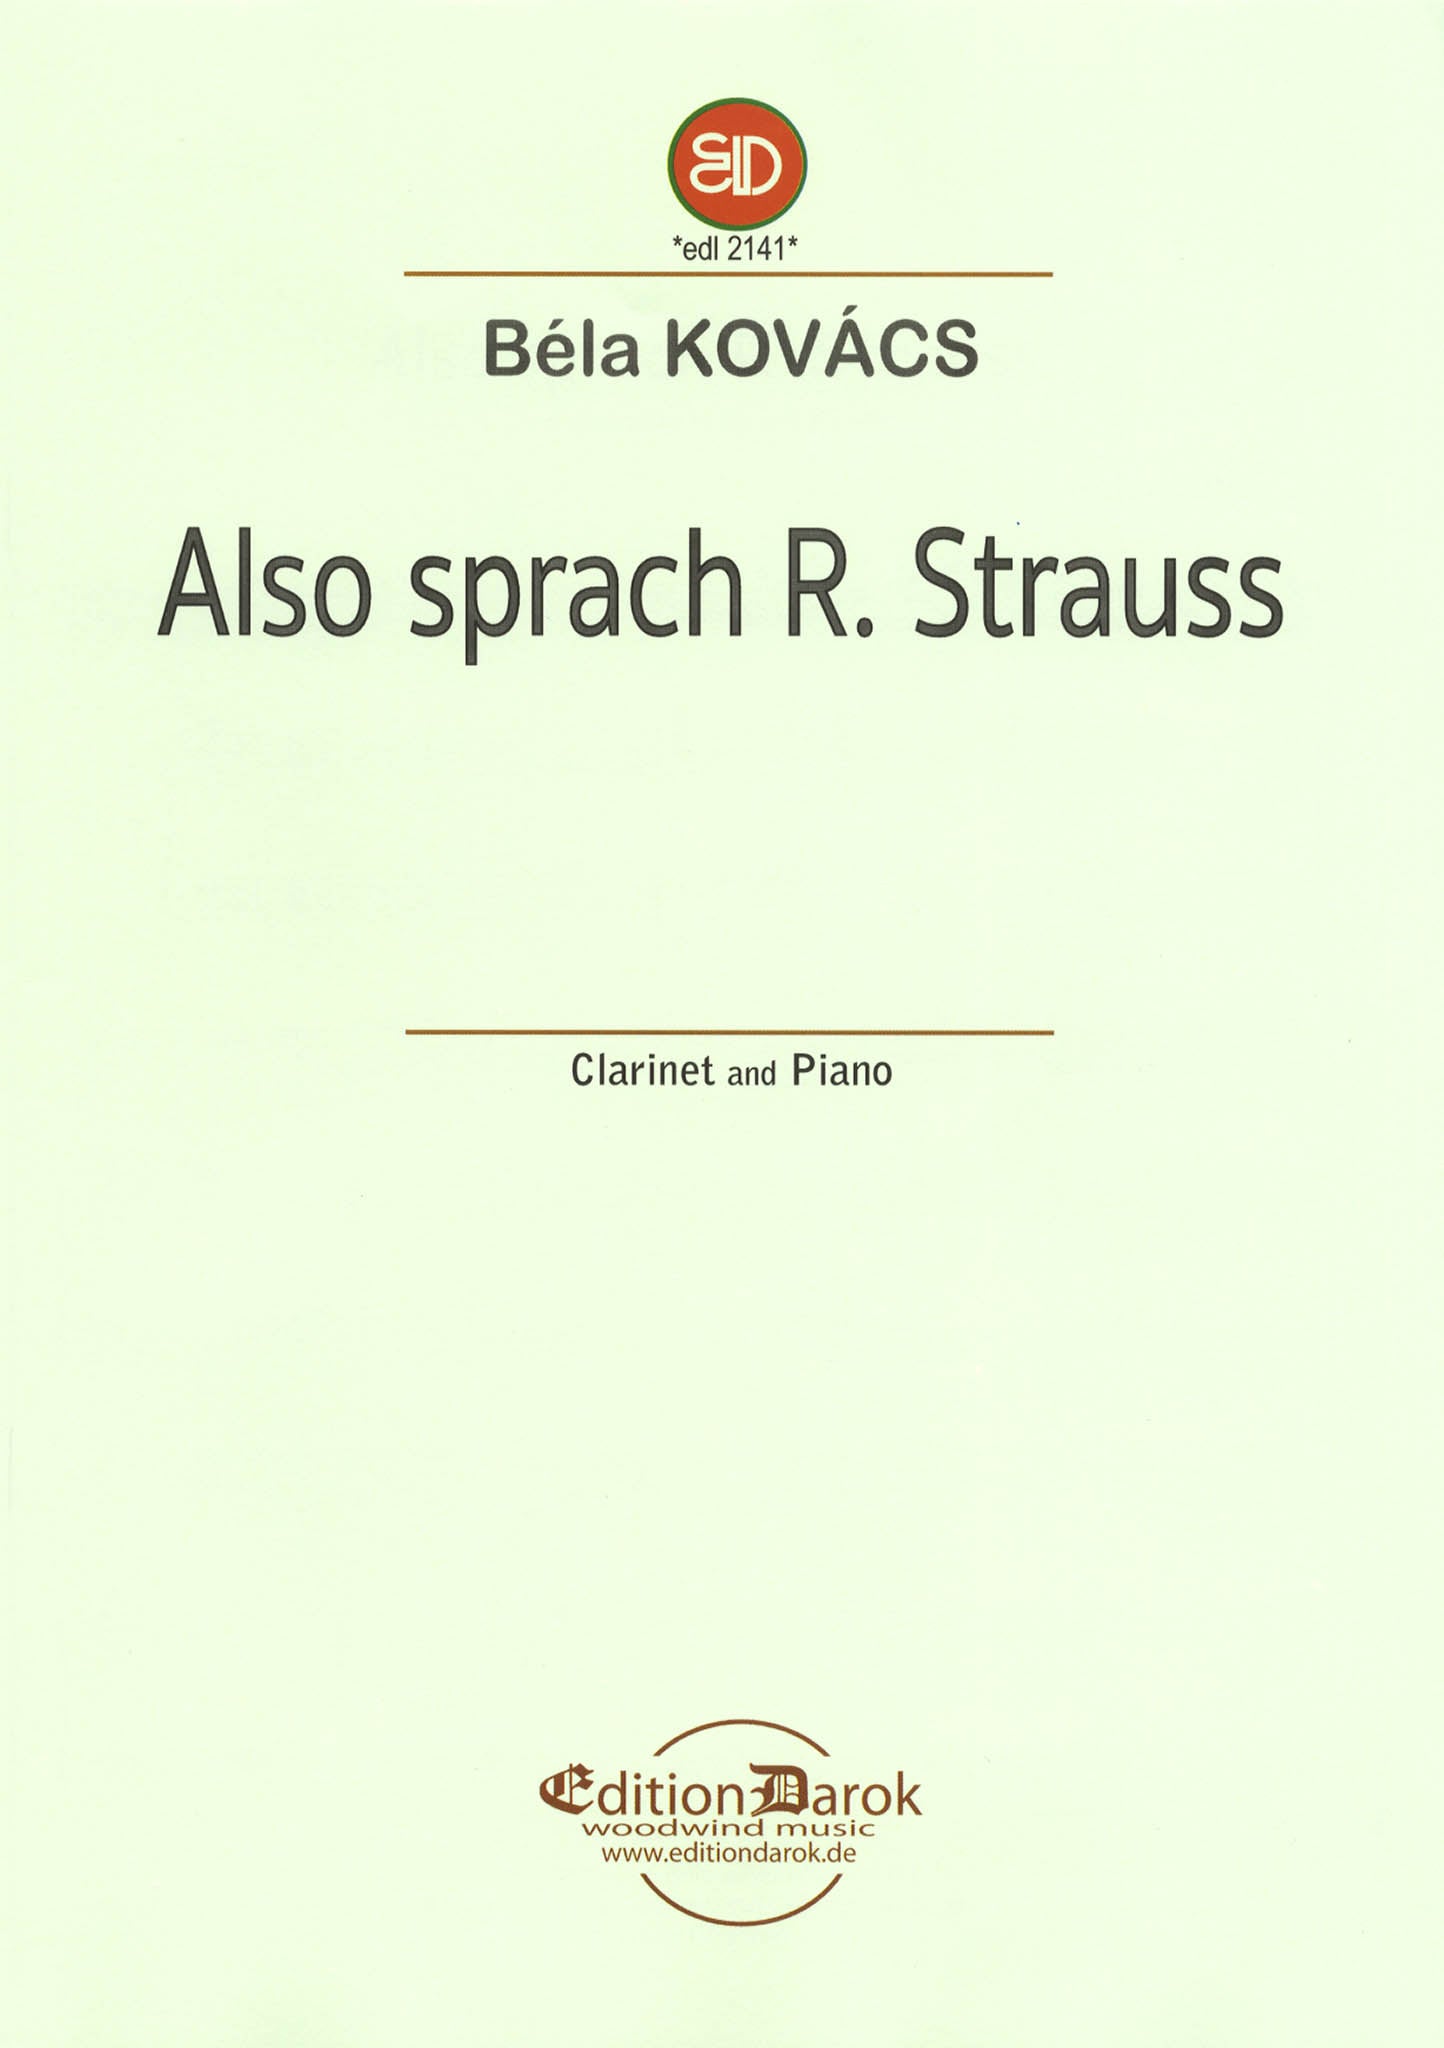 Kovács Hommage a Richard Strauss for clarinet & piano cover